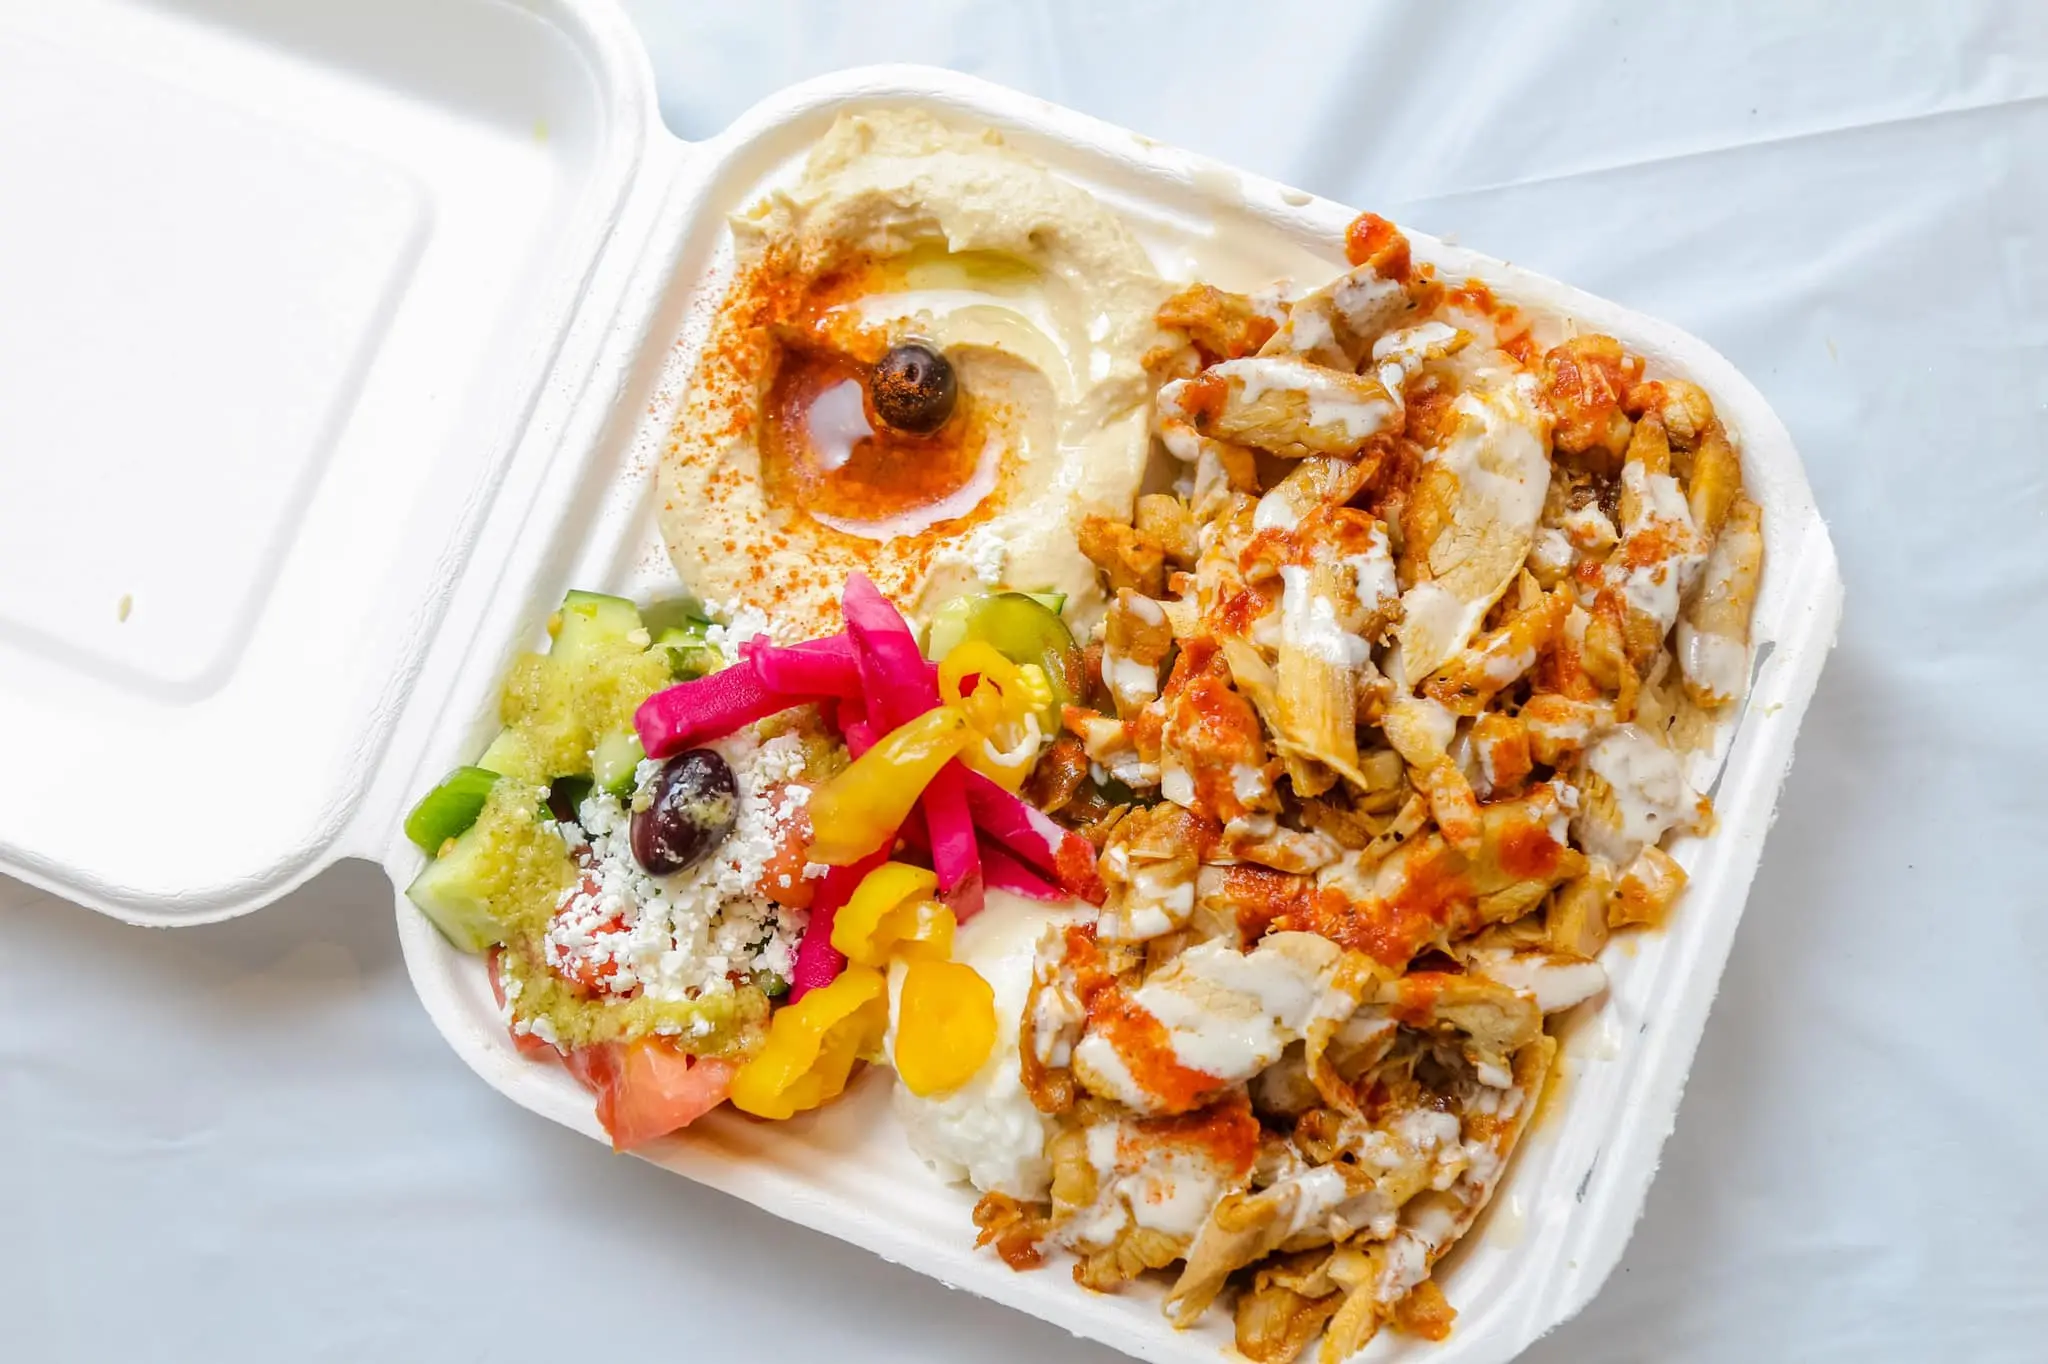 A Chicken Shawarma Plate containing chicken breast & thigh, rice, hummus, salad, and pita bread.